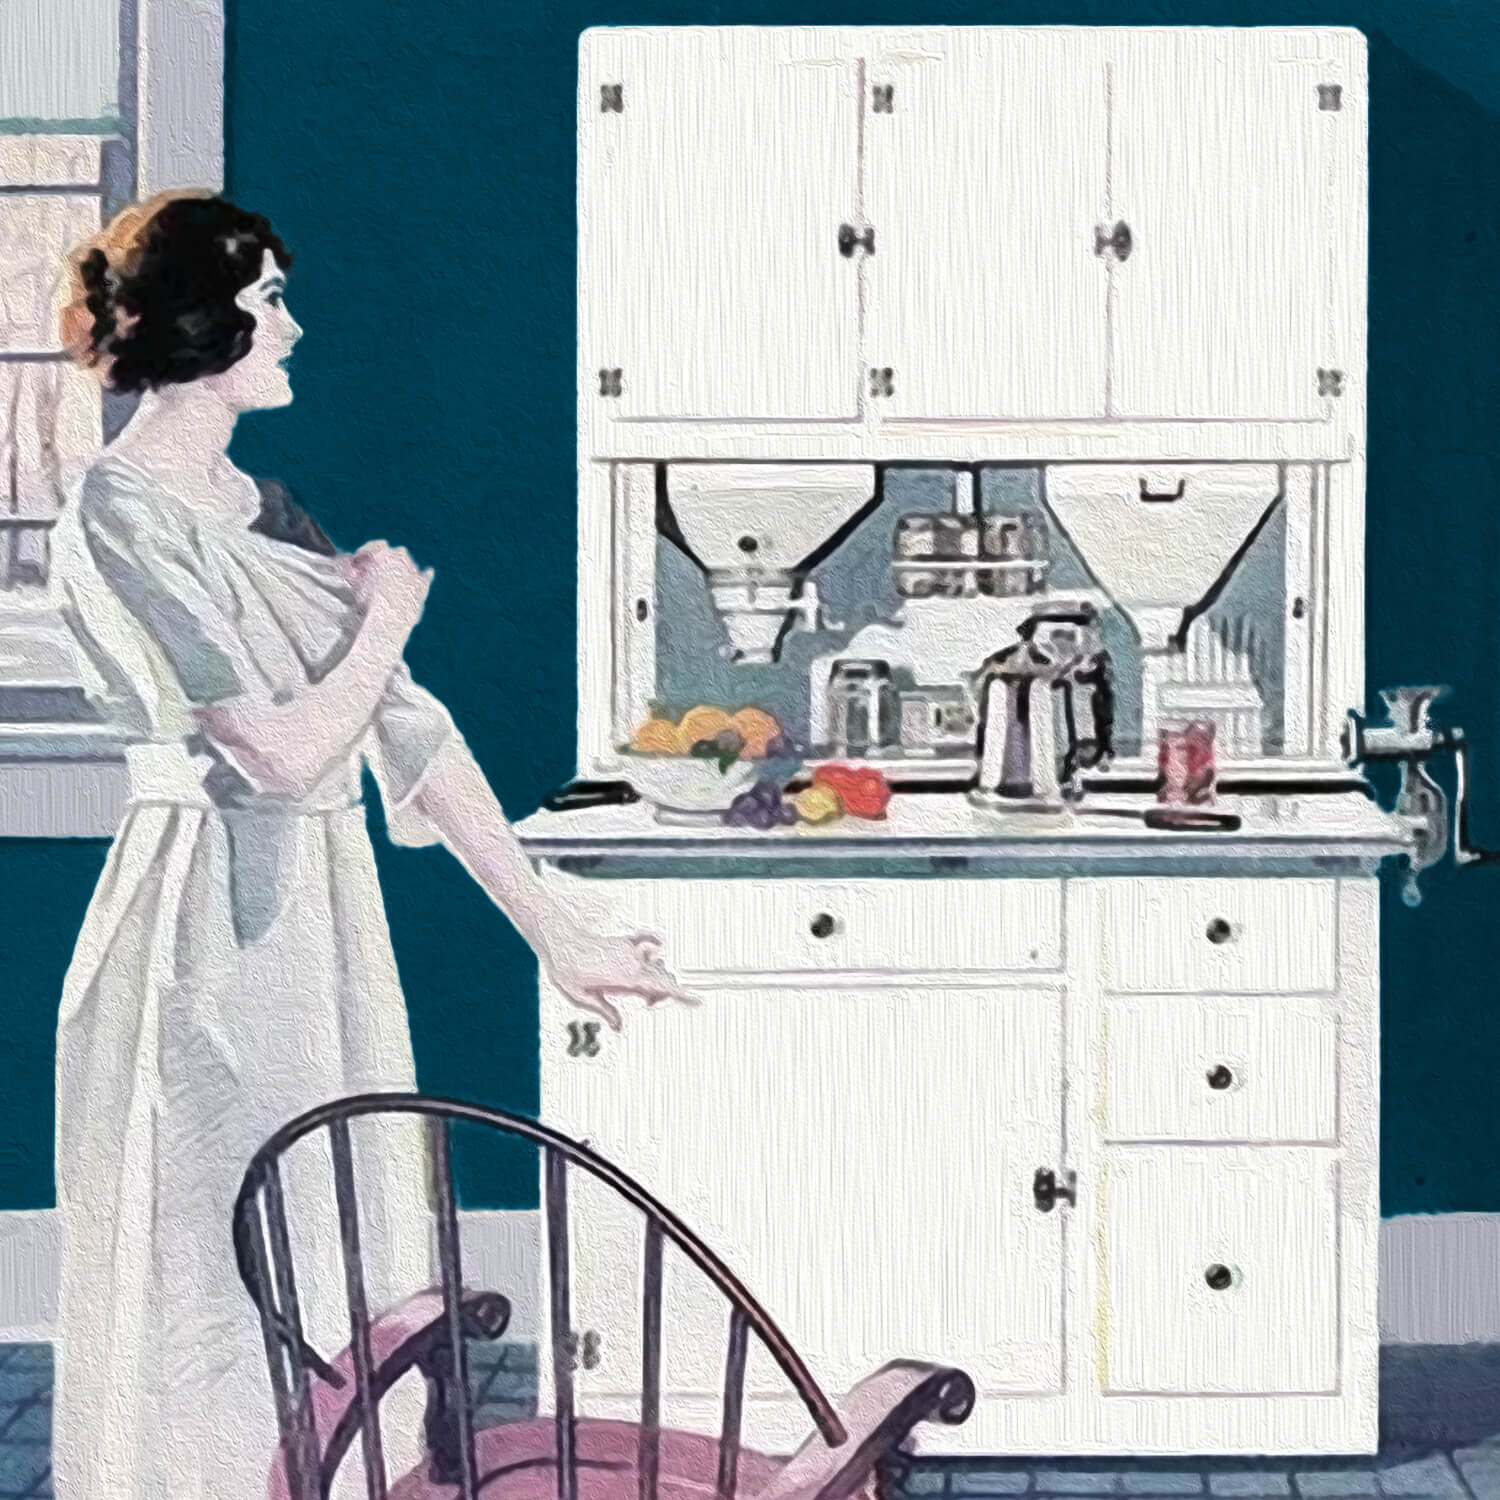 A Hoosier Cabinet Ad from the early 1900s.